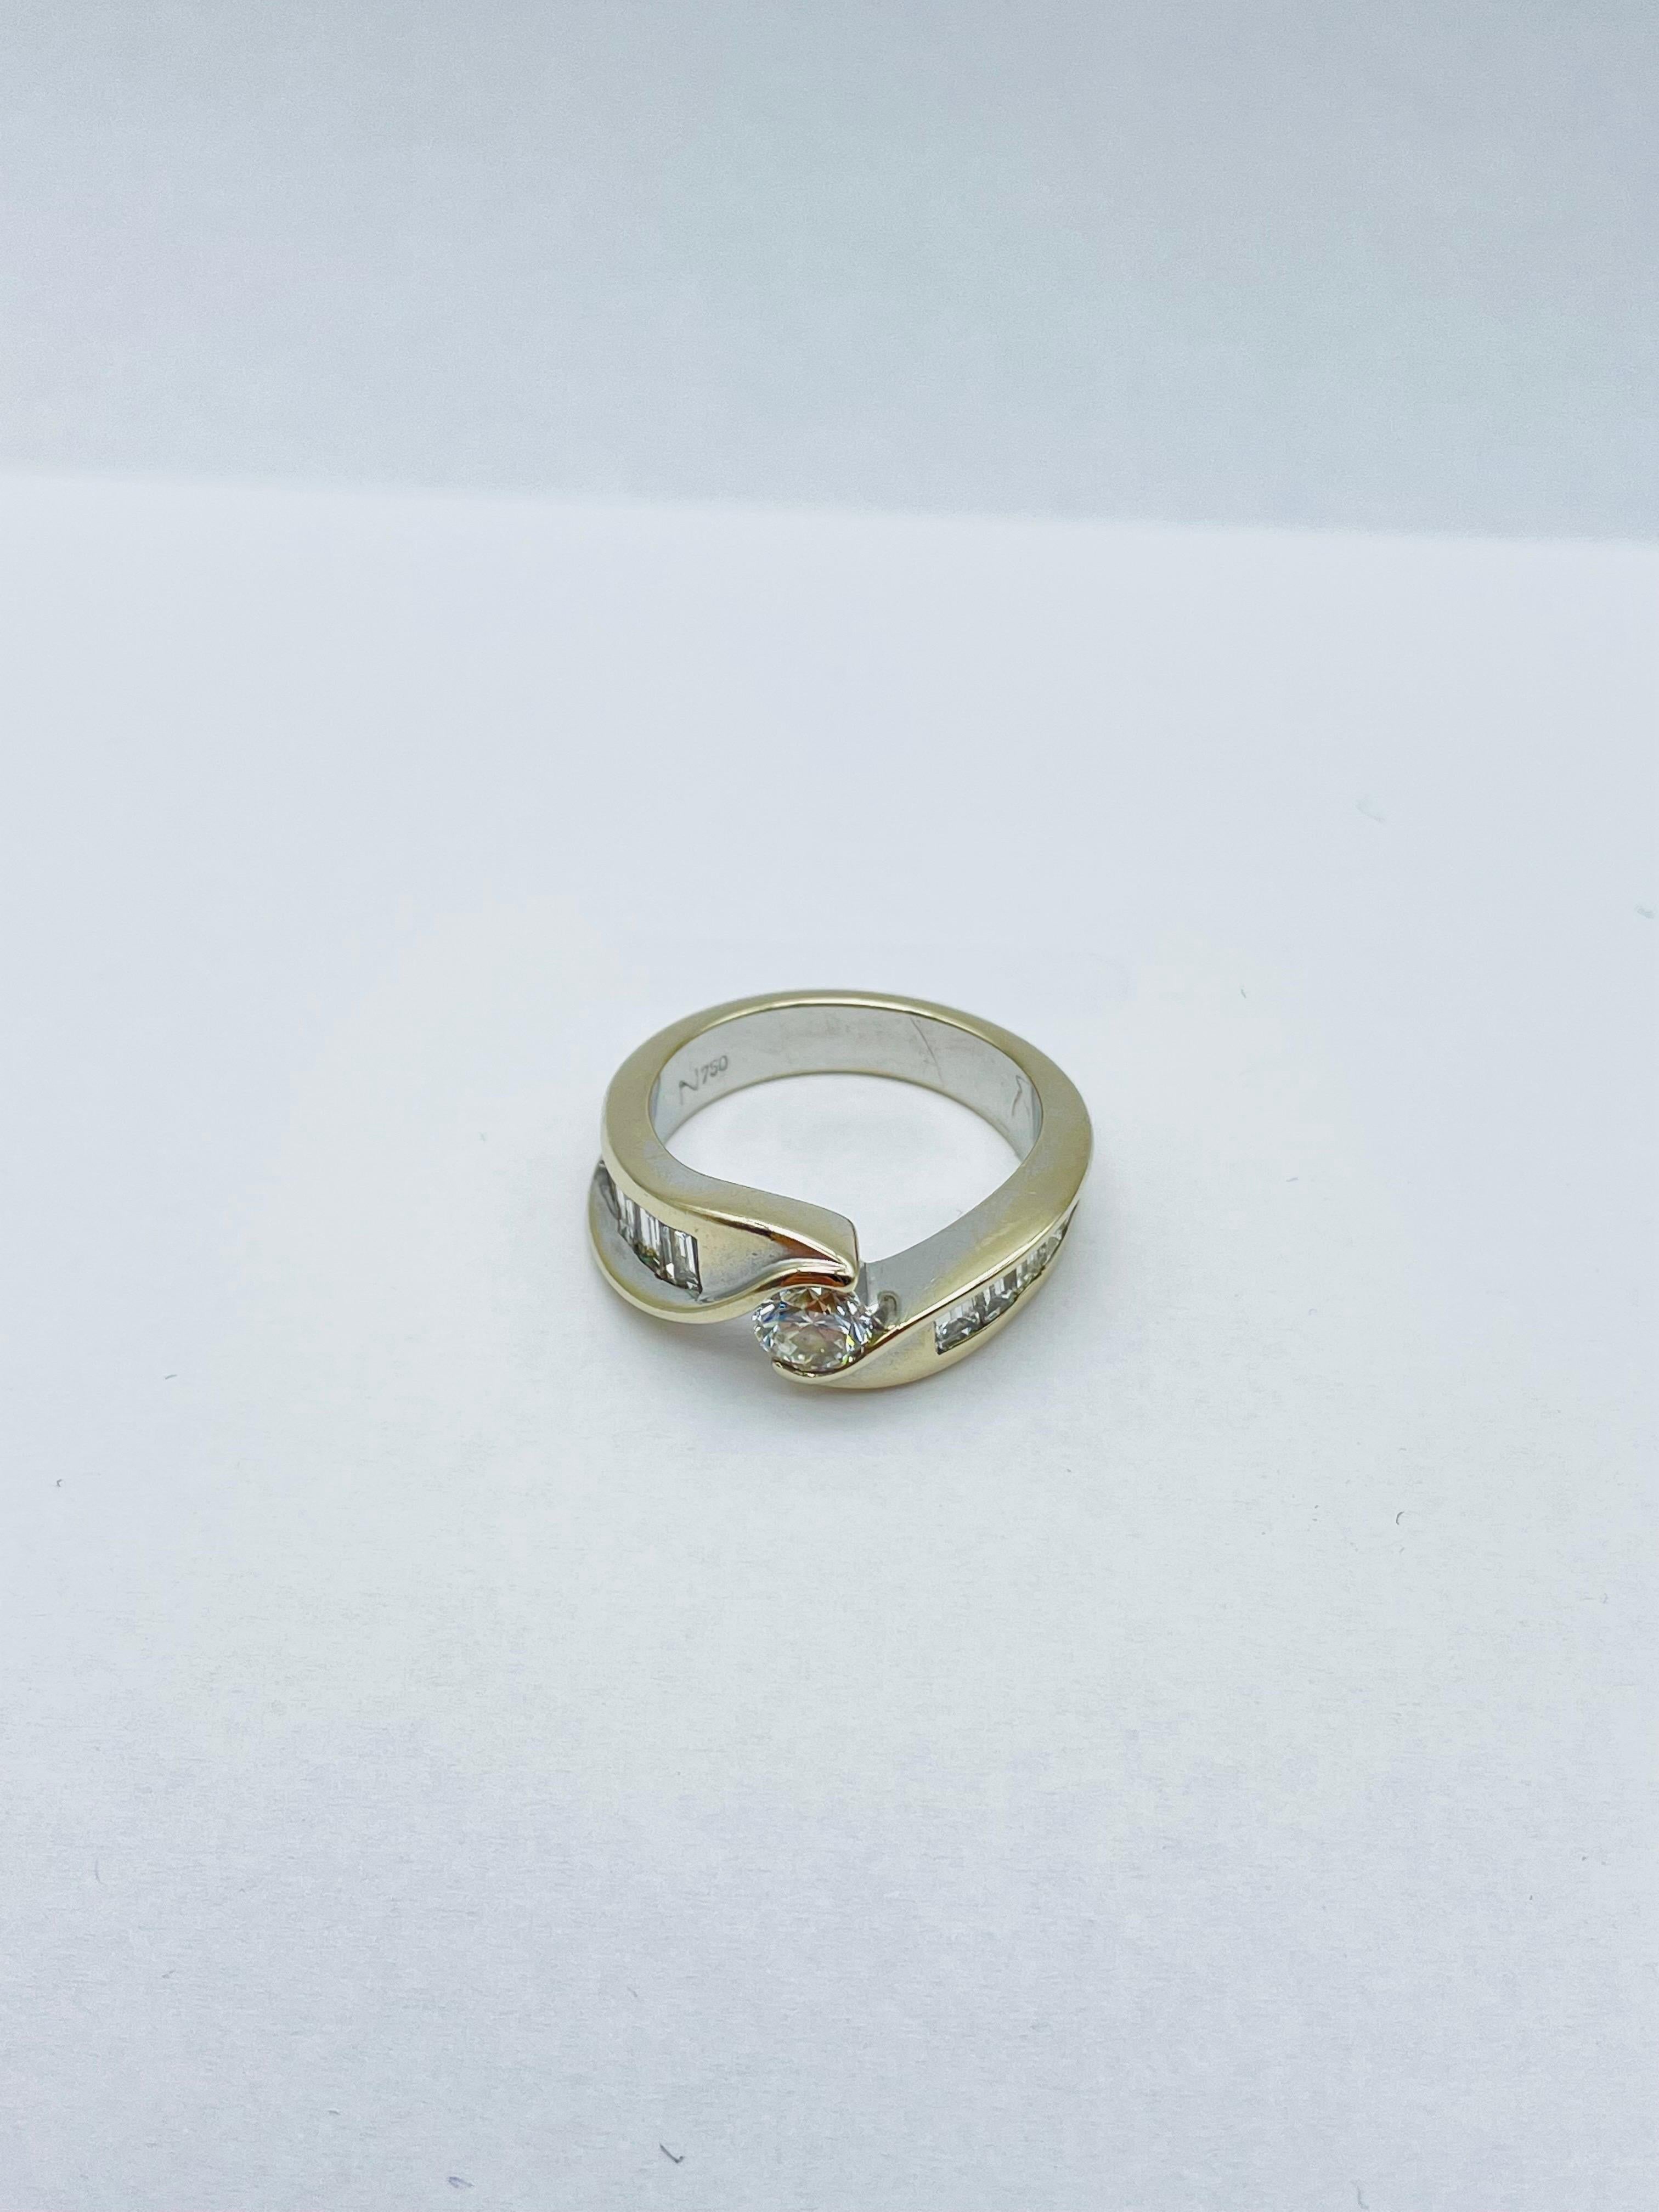 Unique 18k Gold Ring, 0.50 Carat Diamond and 8 Baguette, White/Yellow Gold For Sale 3